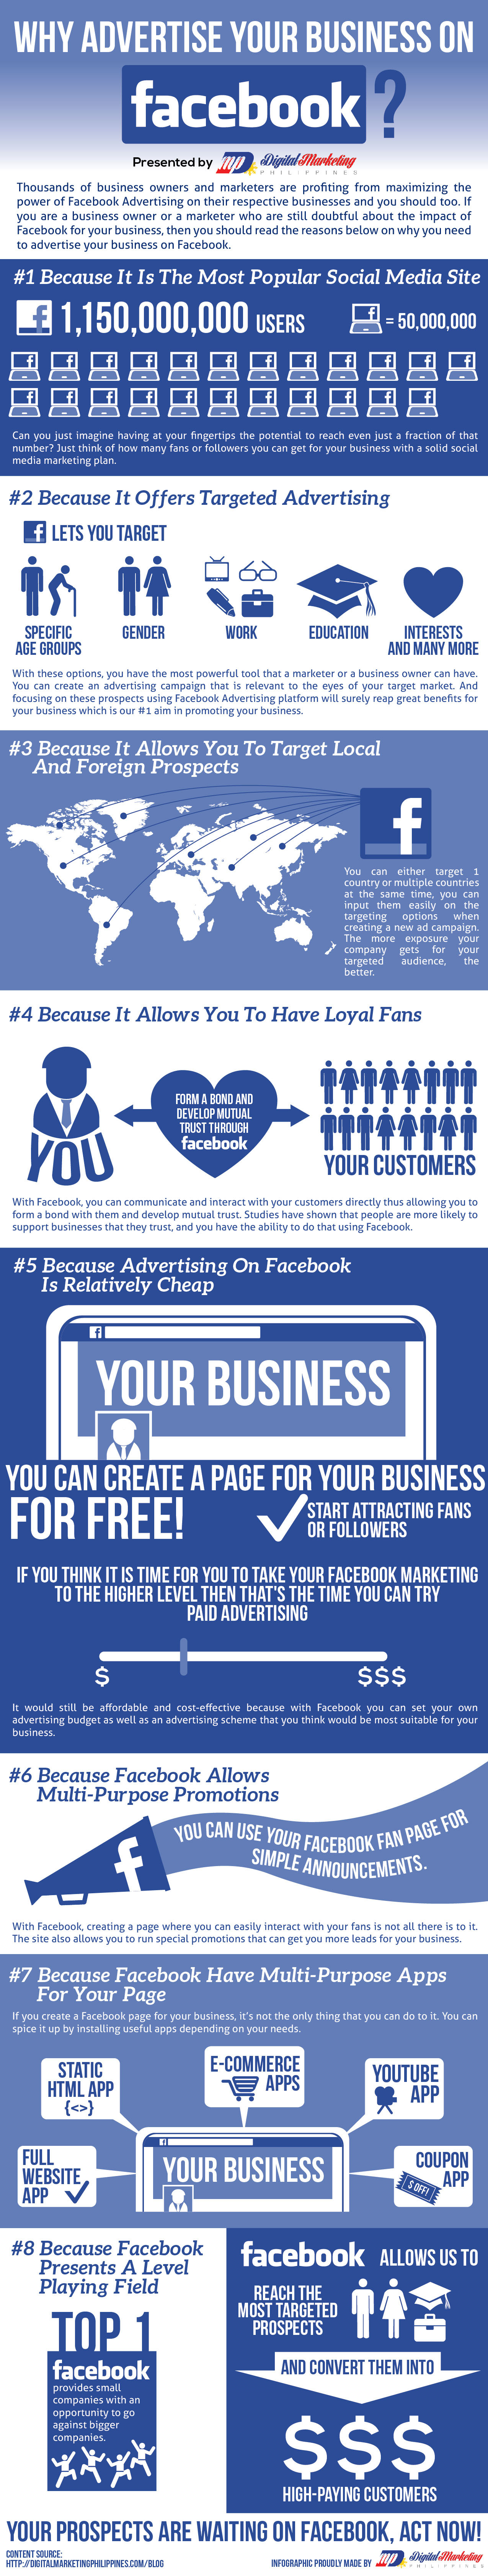 Why Advertise Your Business On Facebook?